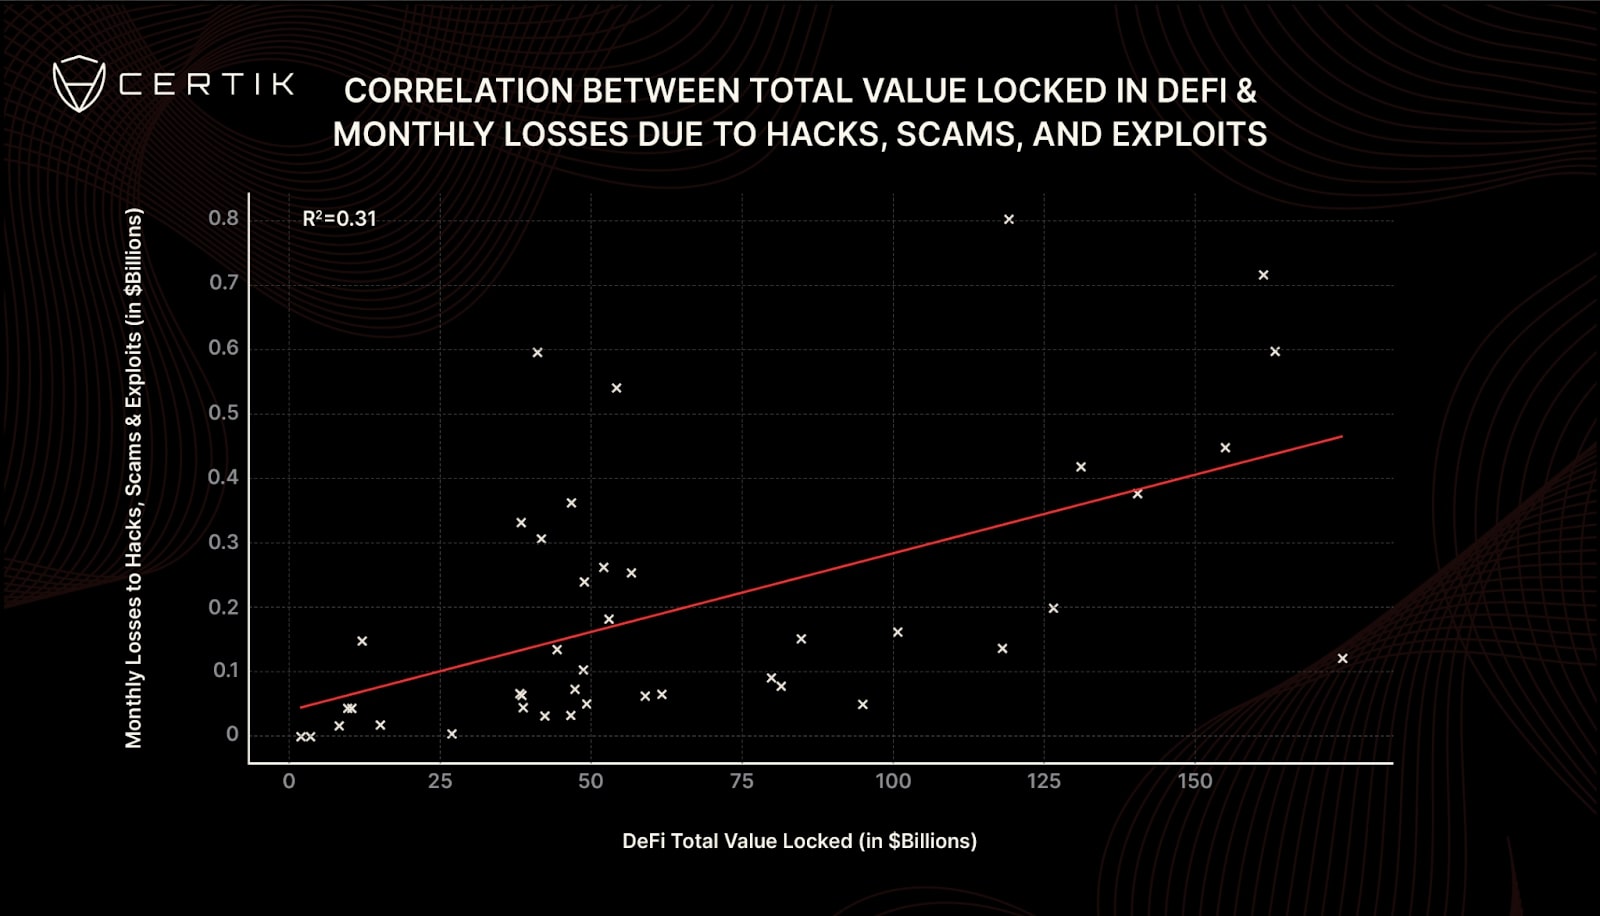 Correlation between total value locked in defi and monthly losses due to hacks, scams, and exploits